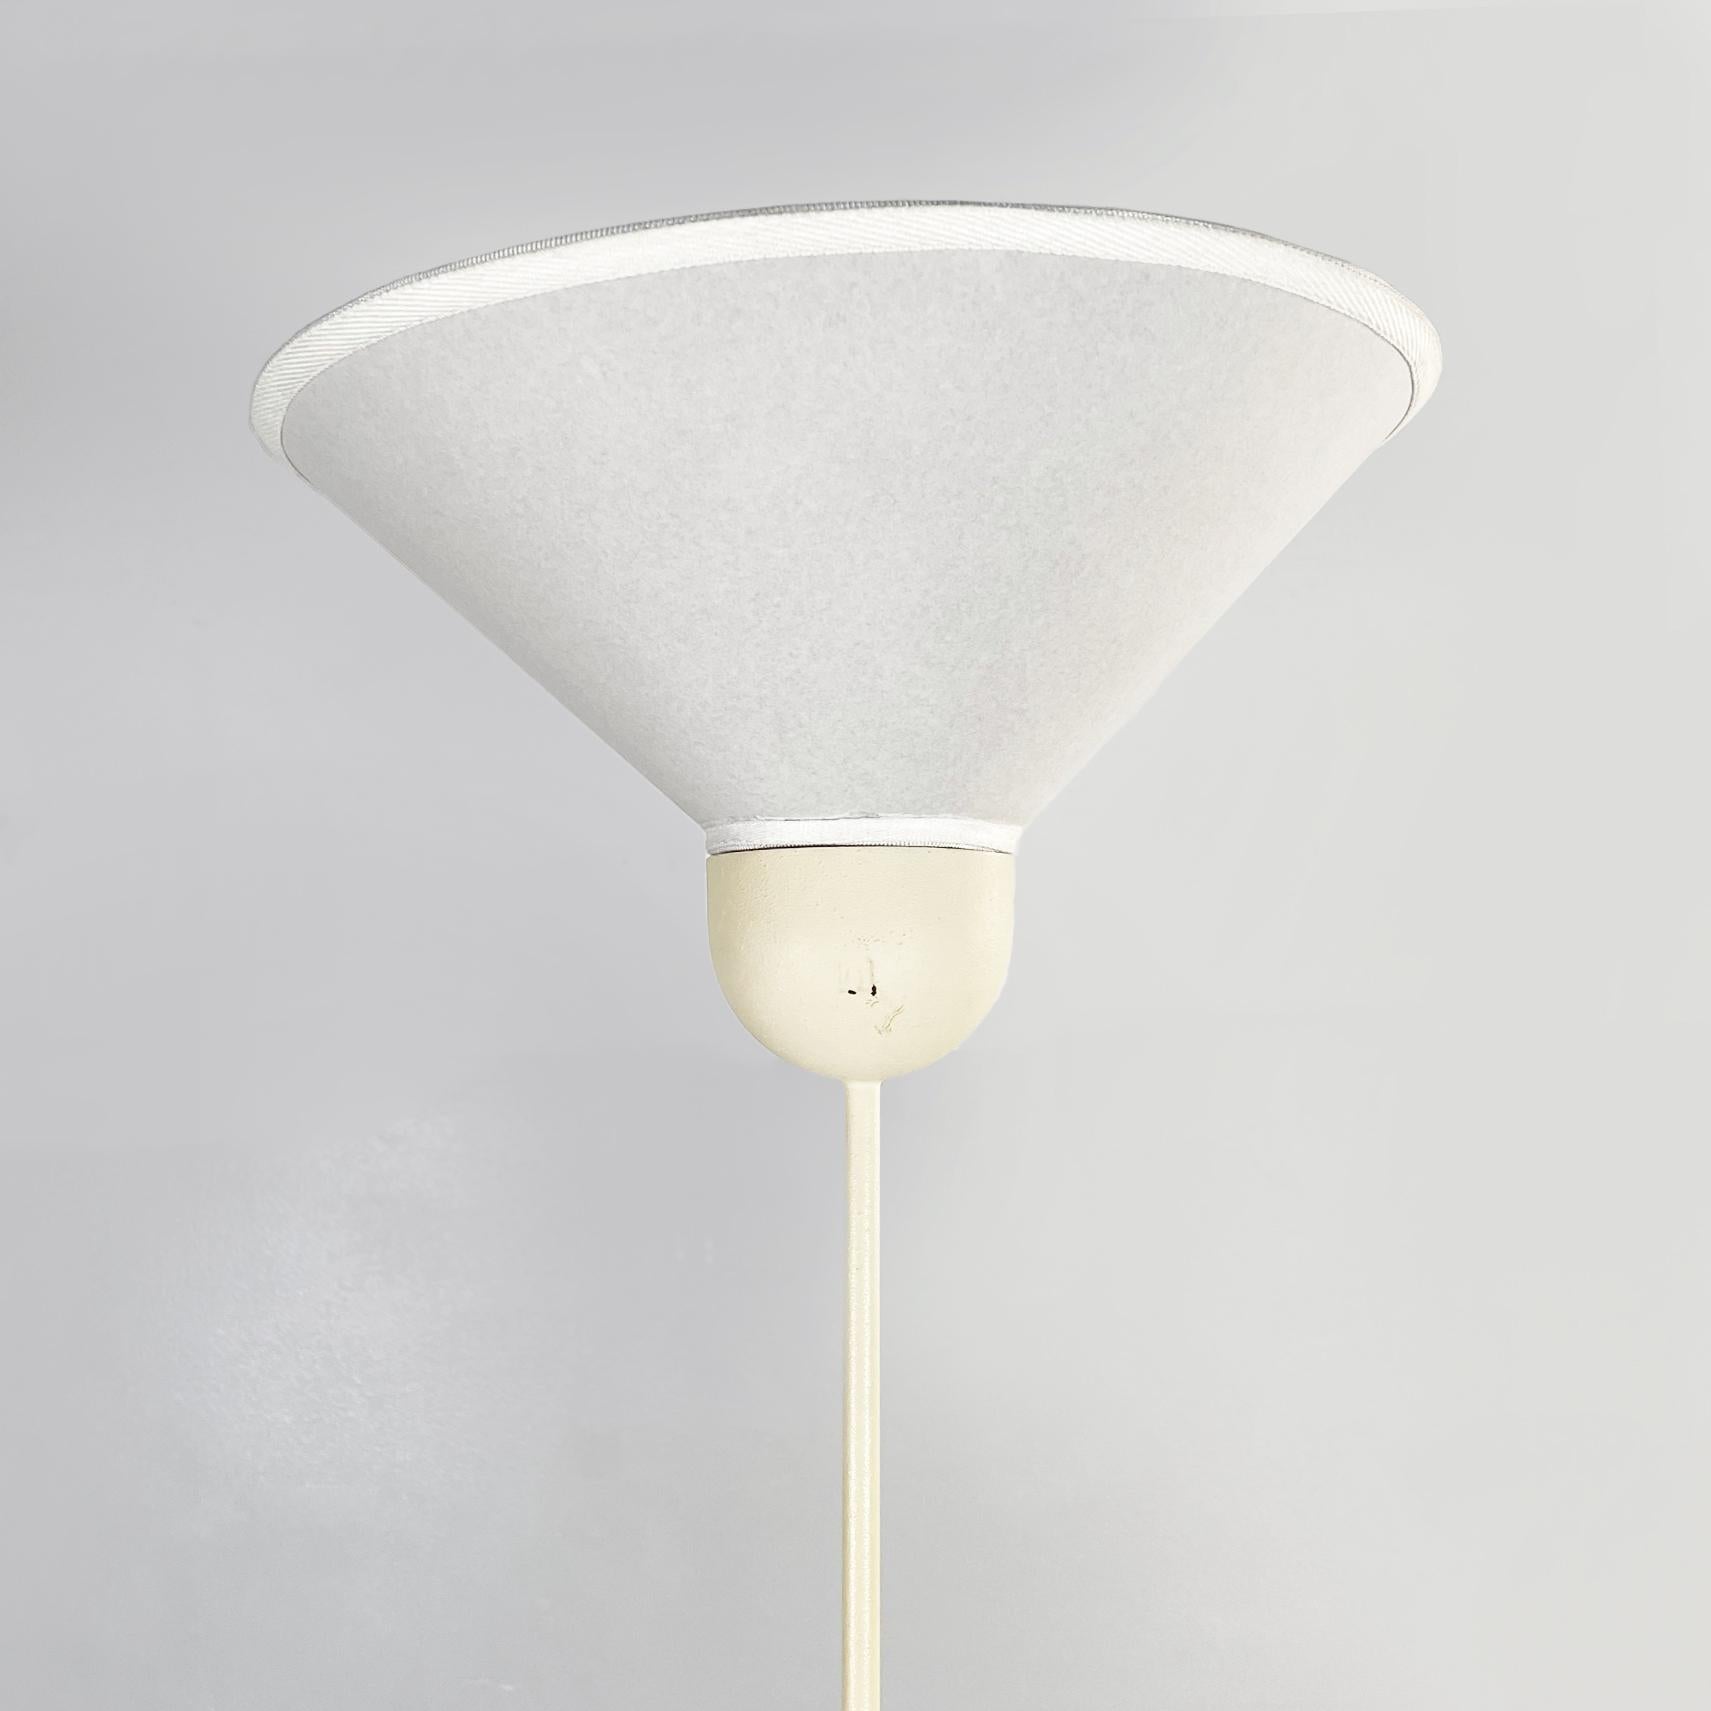 Italian Mid-Century Modern Floor Lamp in White Fabric and Metal, 1980s In Good Condition For Sale In MIlano, IT